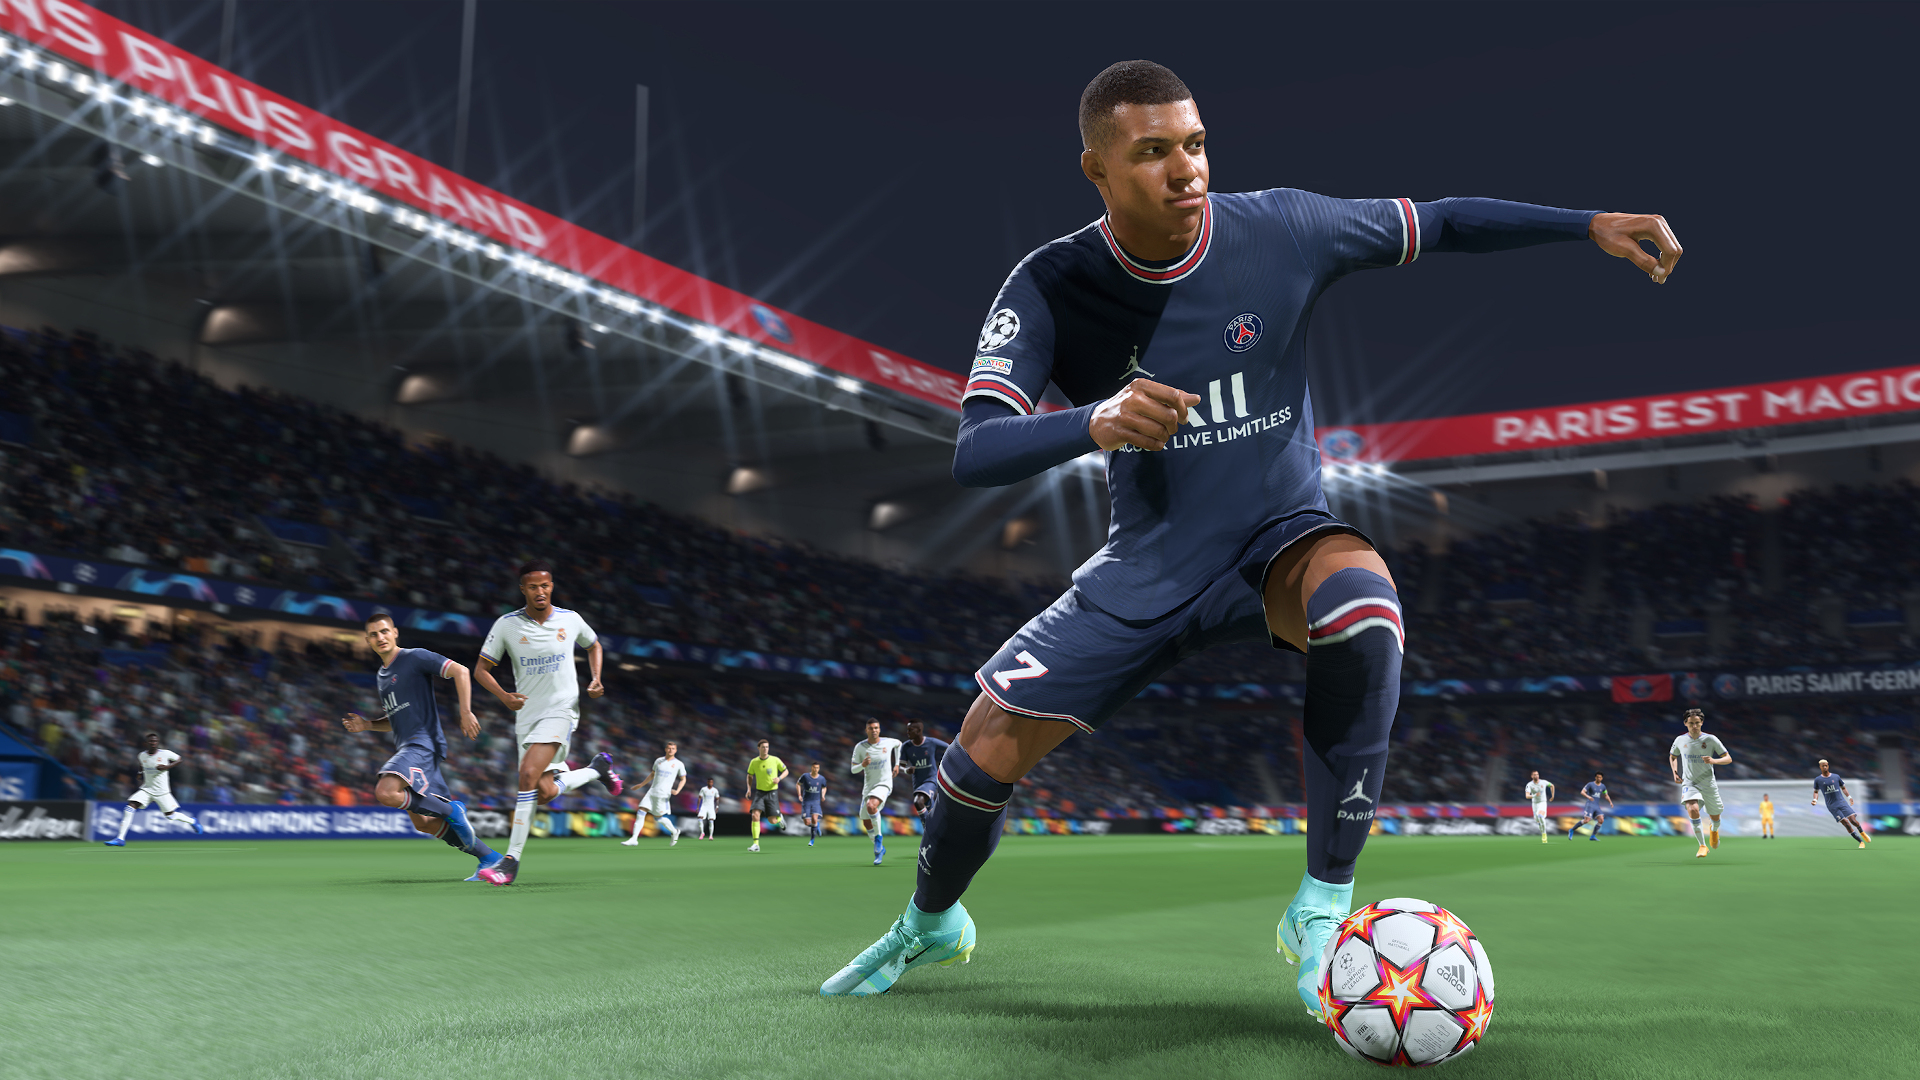 FIFA 22 Division Rivals: Mbappe charges forward with the ball at his feet.